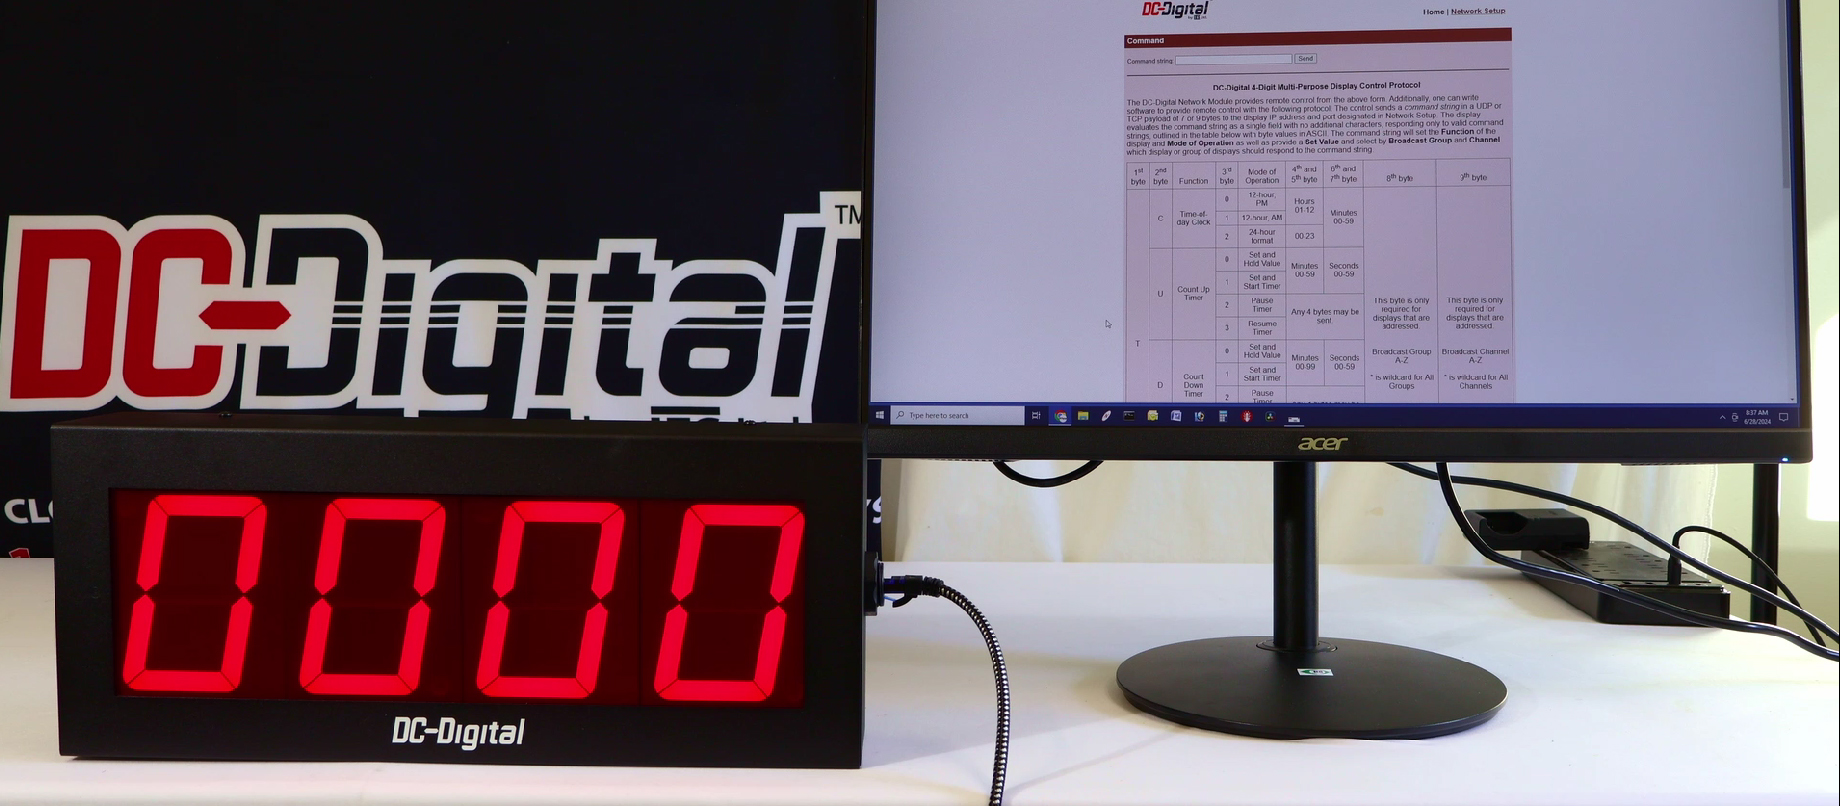 DC-Digital, Network powered, POE powered, Time of day, up-timer, down-timer, webpage controlled, white table